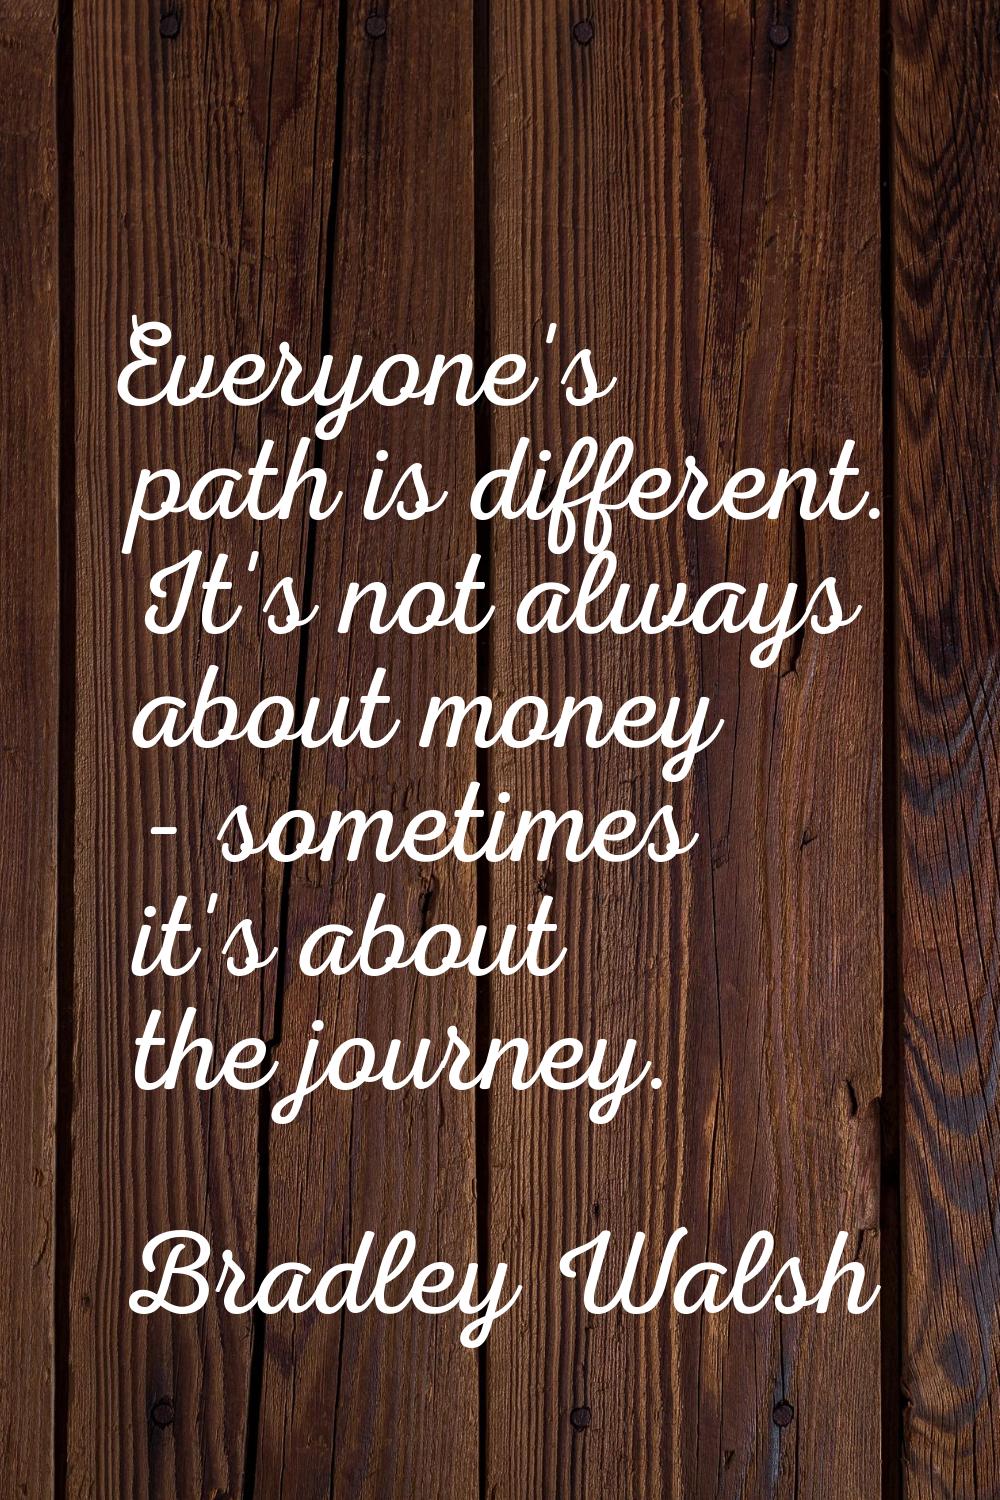 Everyone's path is different. It's not always about money - sometimes it's about the journey.